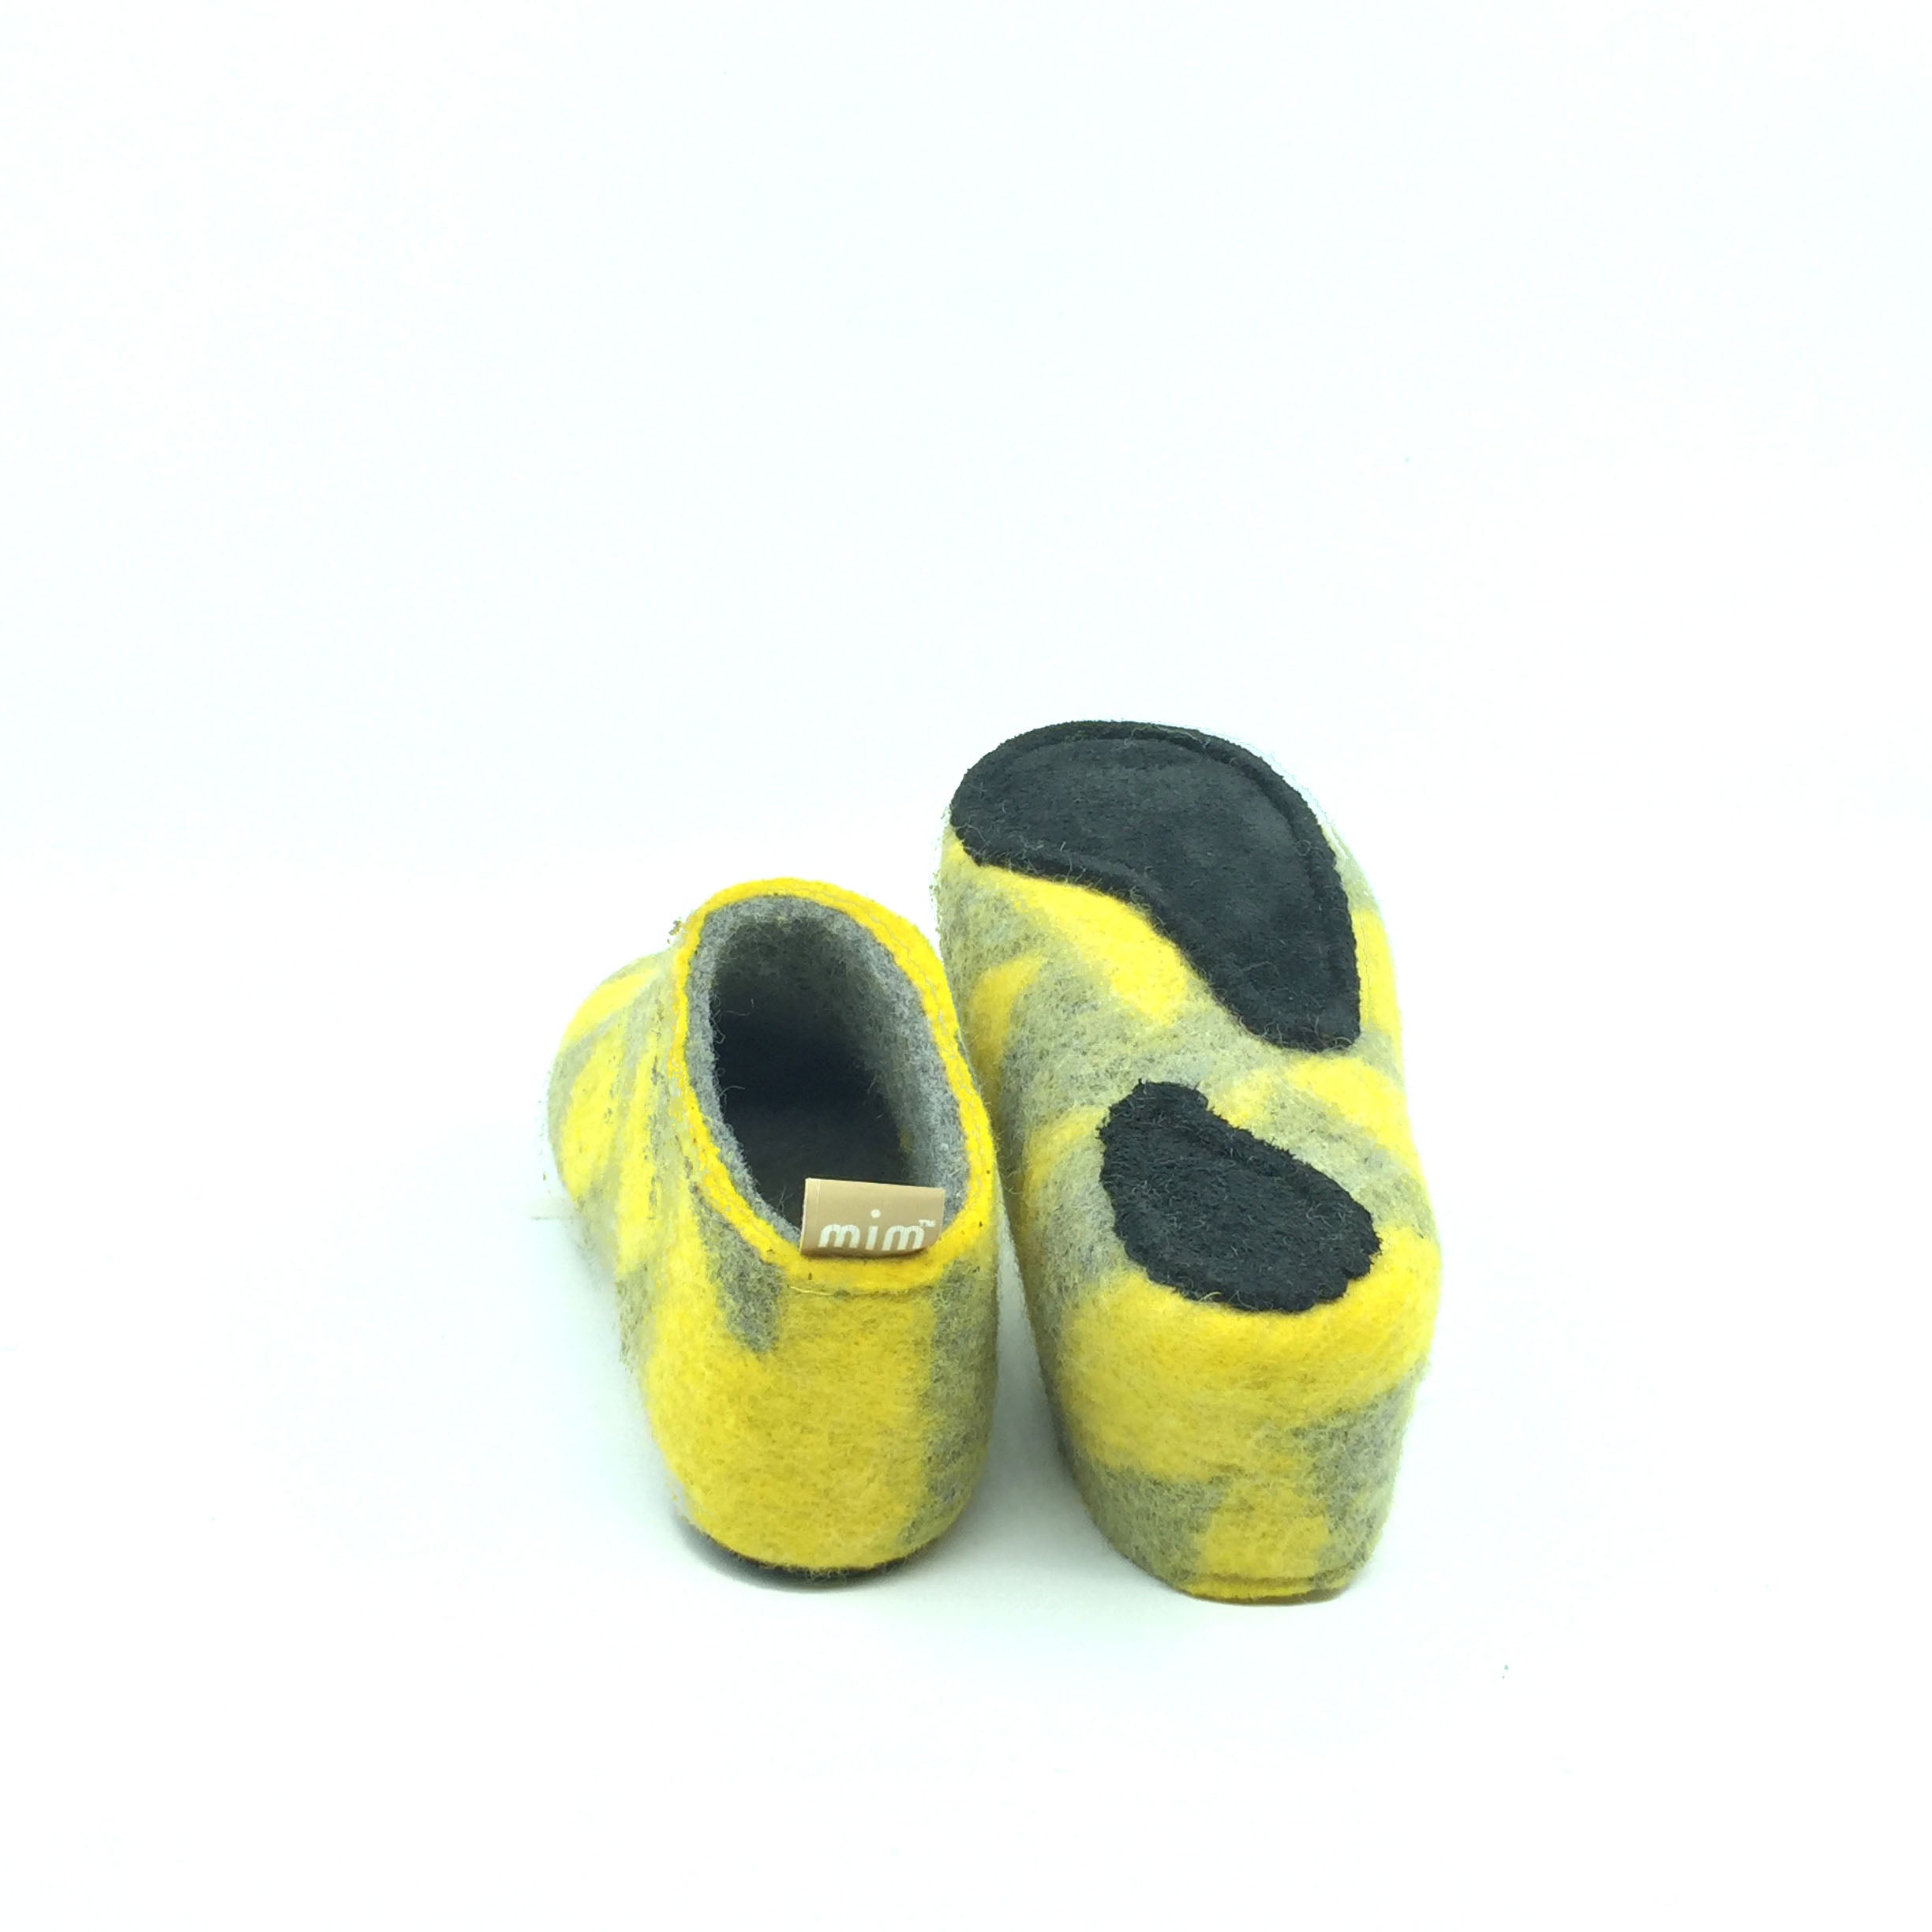 Children's Slippers 100% wool felt in Yellow with Grey Interior